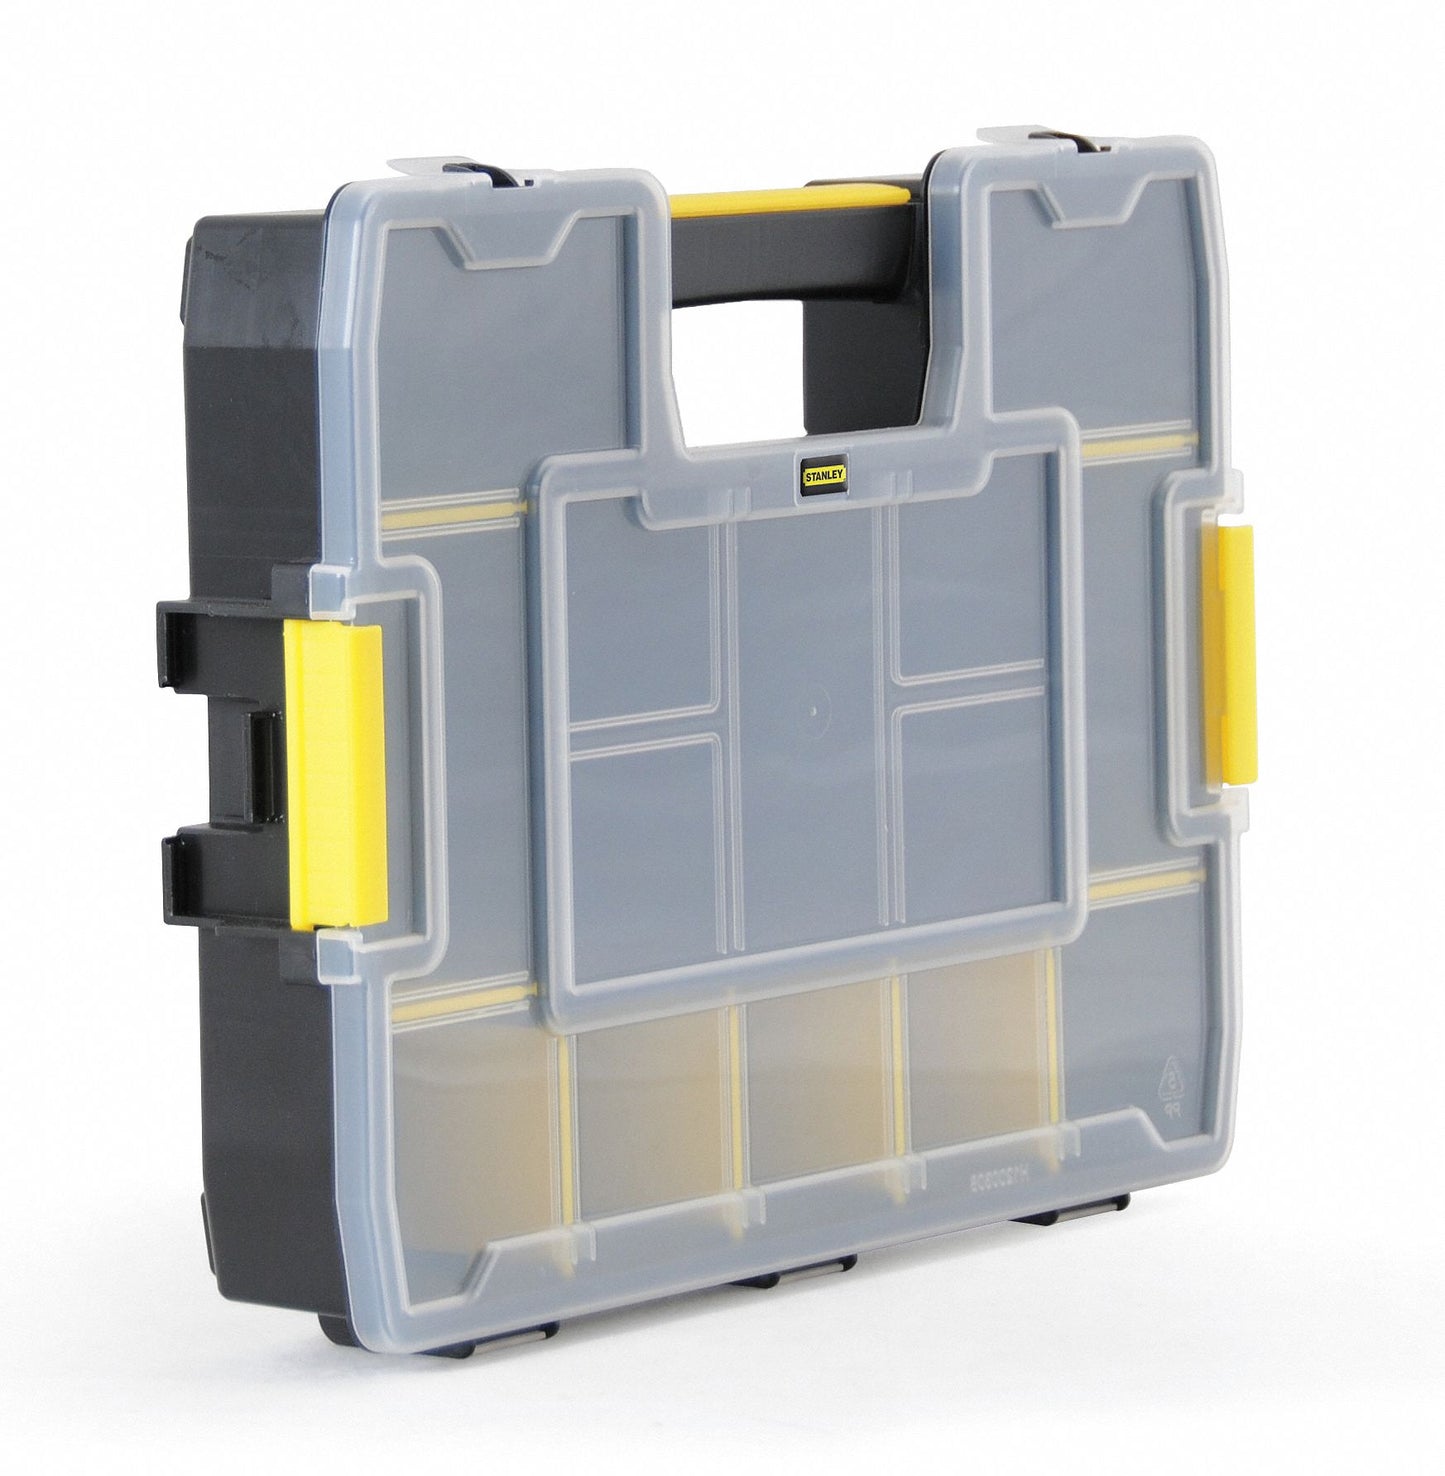 Stanley 14 Compartment Box, 2-3/5"H